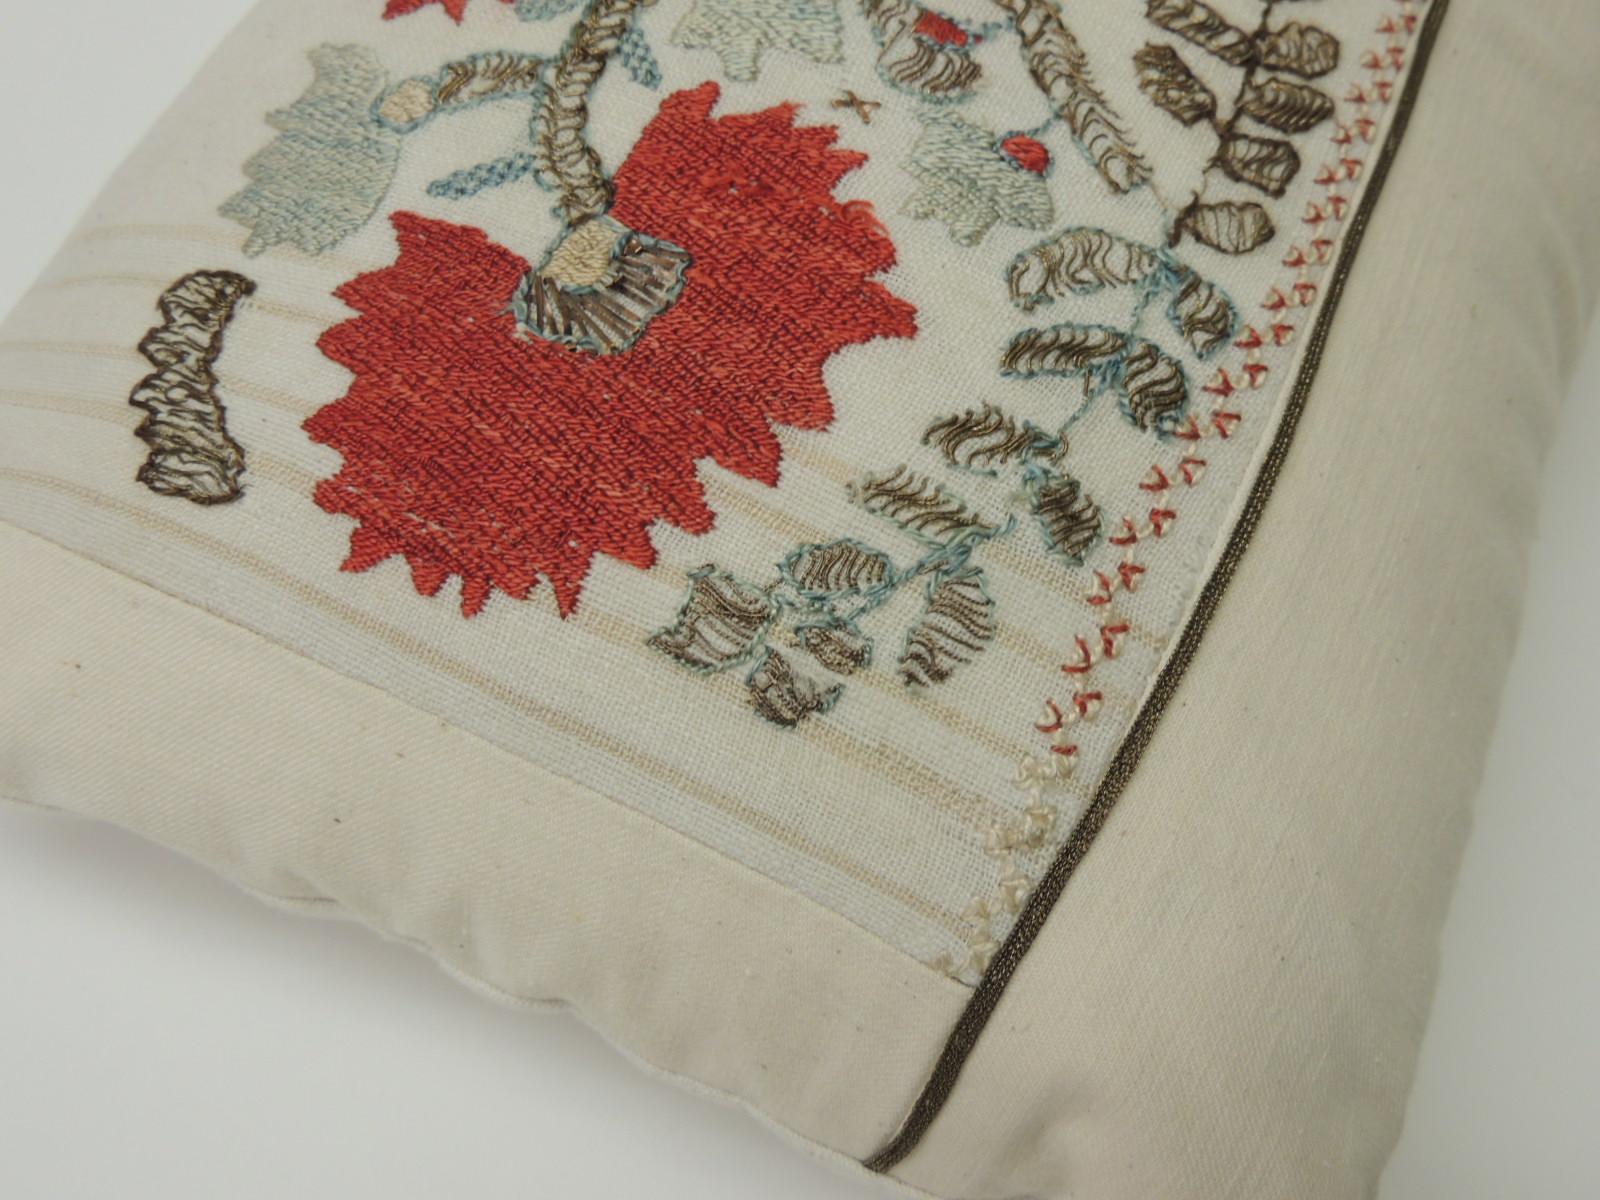 Anglo Raj 19th Century Red and Green Turkish Embroidery Lumbar Decorative Pillow